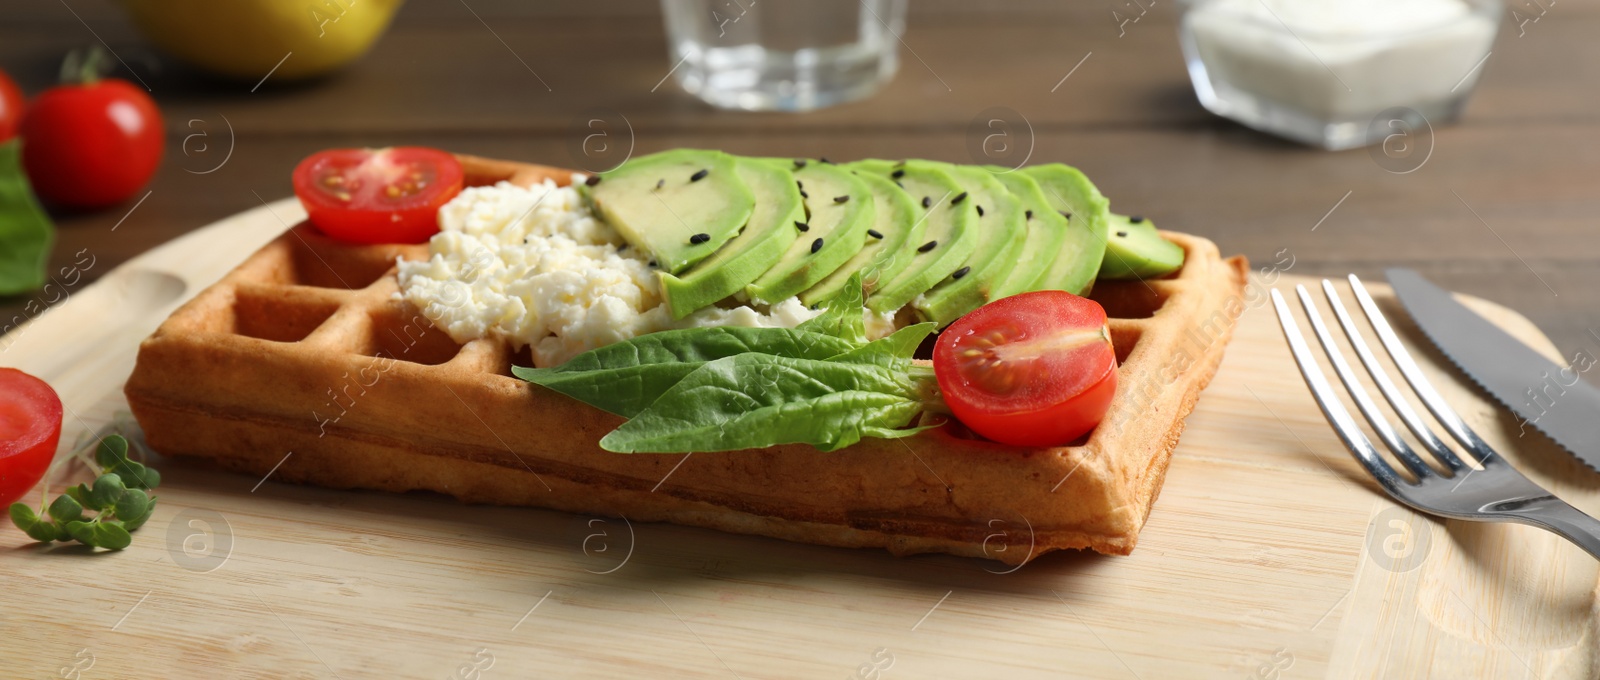 Photo of Fresh Belgian waffle with avocado, tomatoes and basil served for breakfast on wooden table